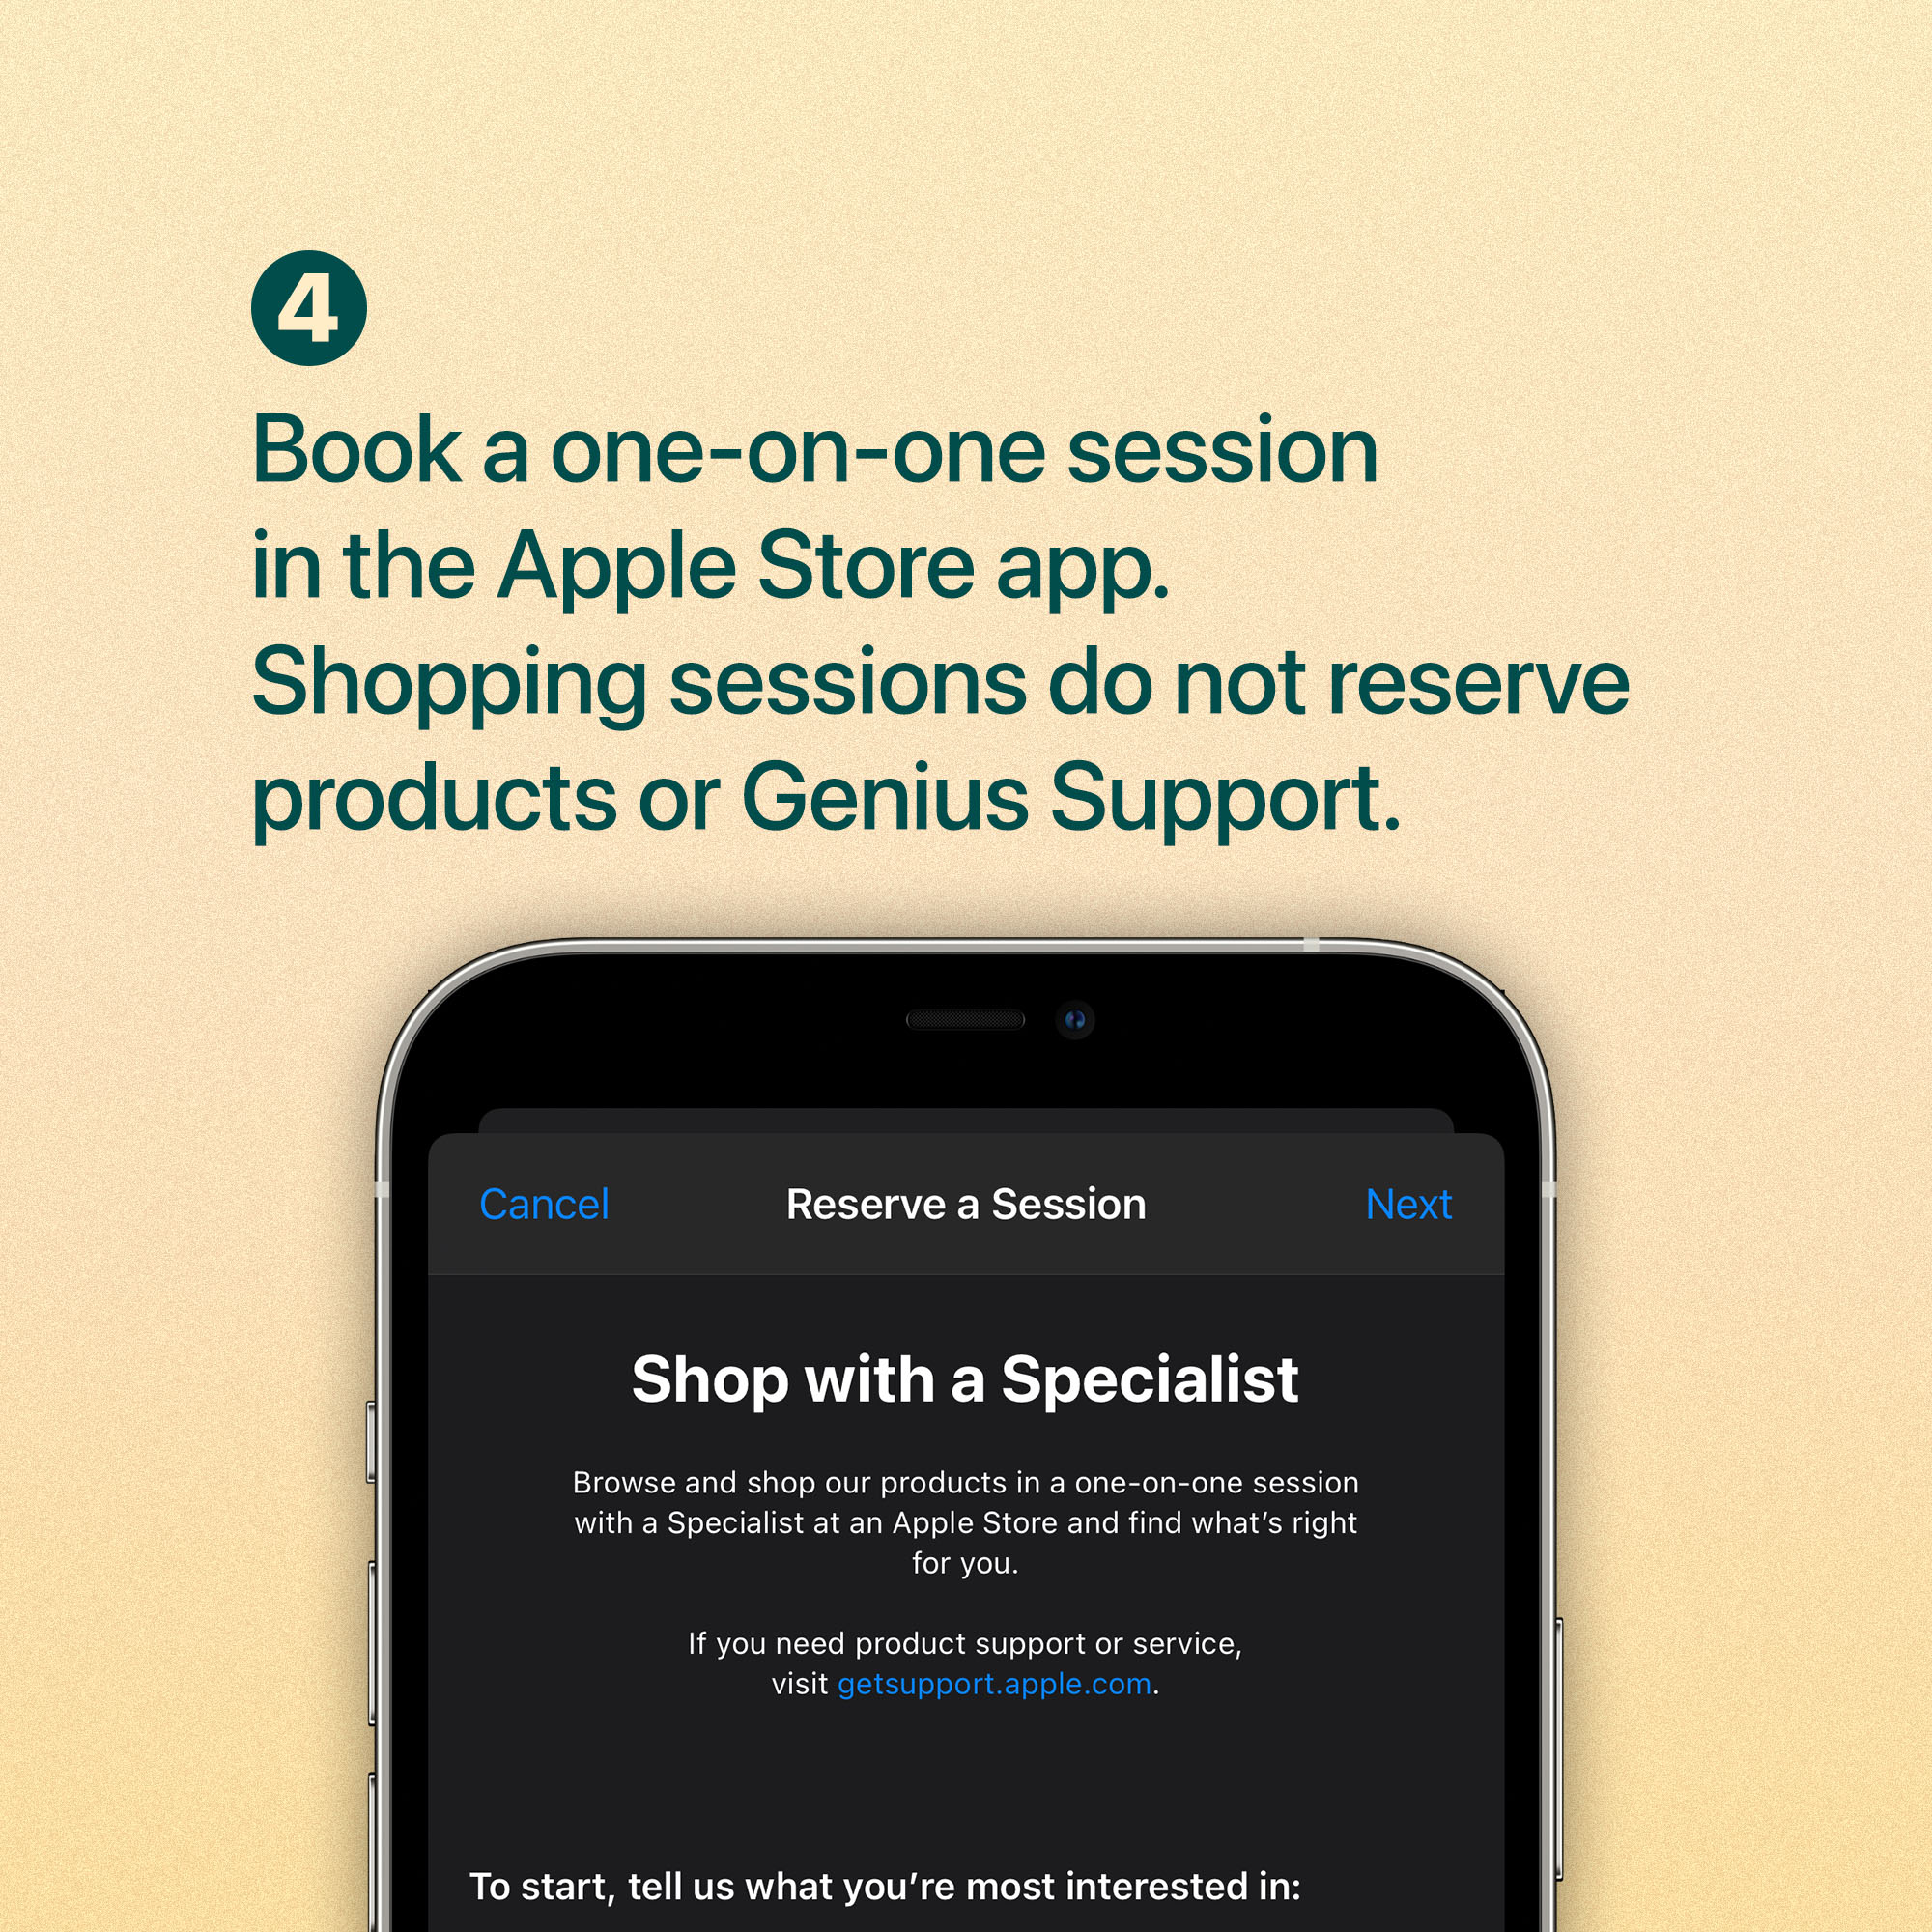 Book a one-on-one session in the Apple Store app. Shopping sessions do not reserve products or Genius Support.